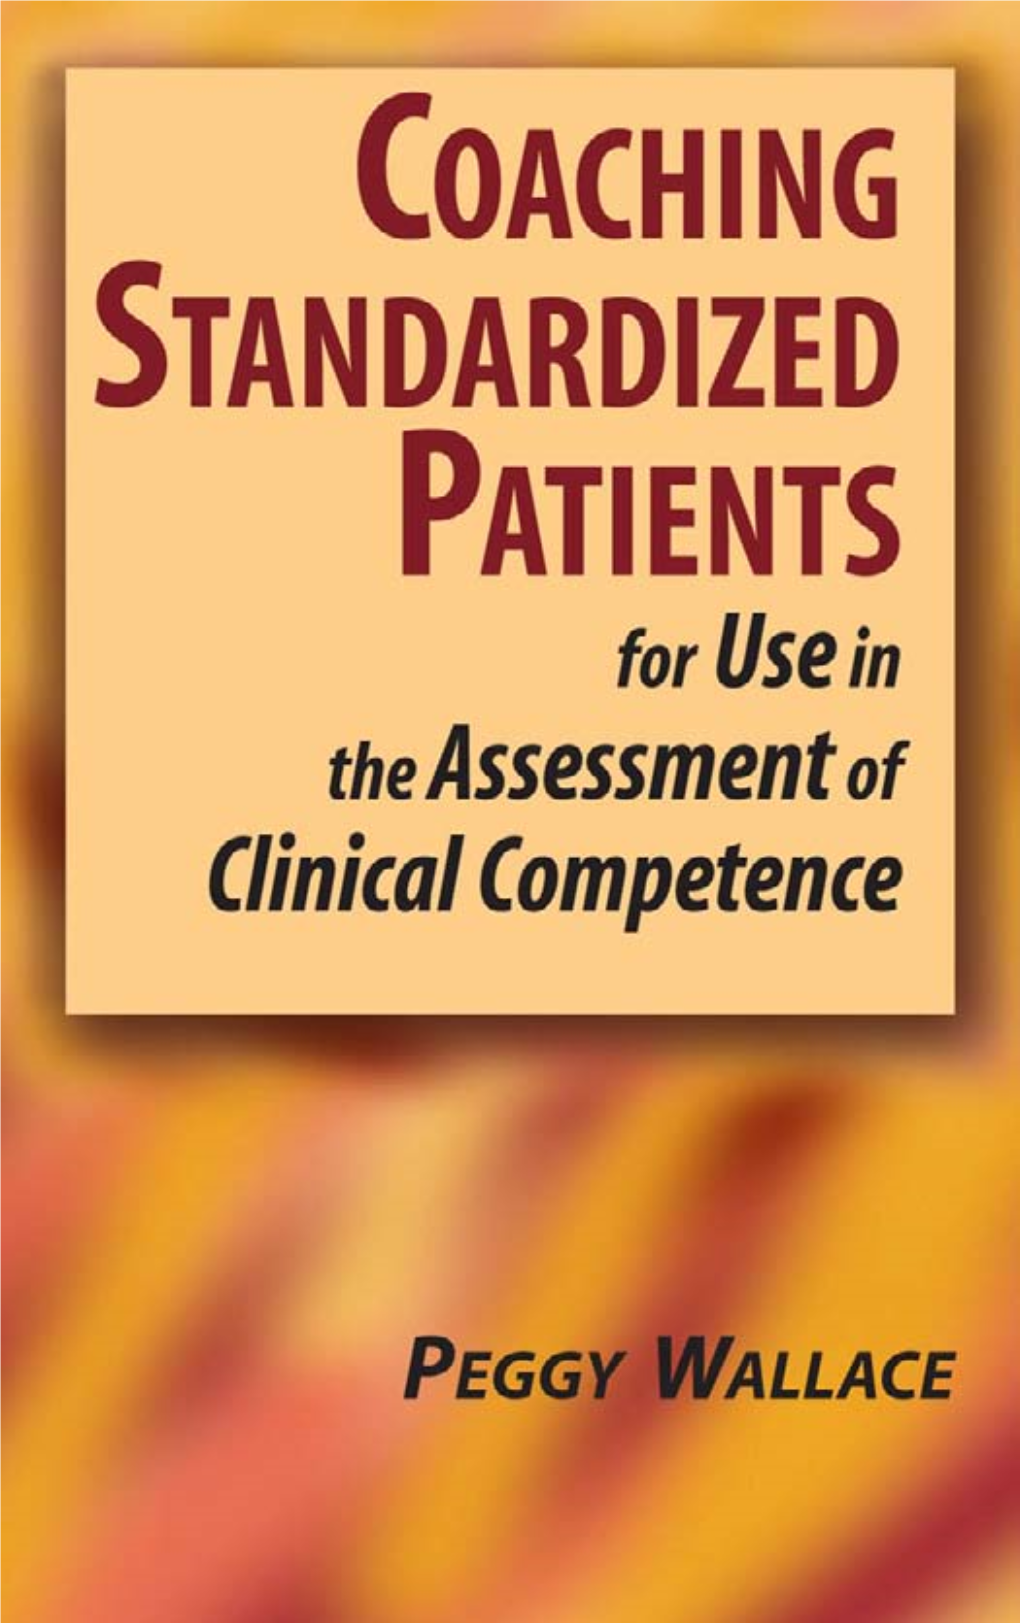 Coaching Standardized Patients : for Use in the Assessment of Clinical Competence / Peggy Wallace